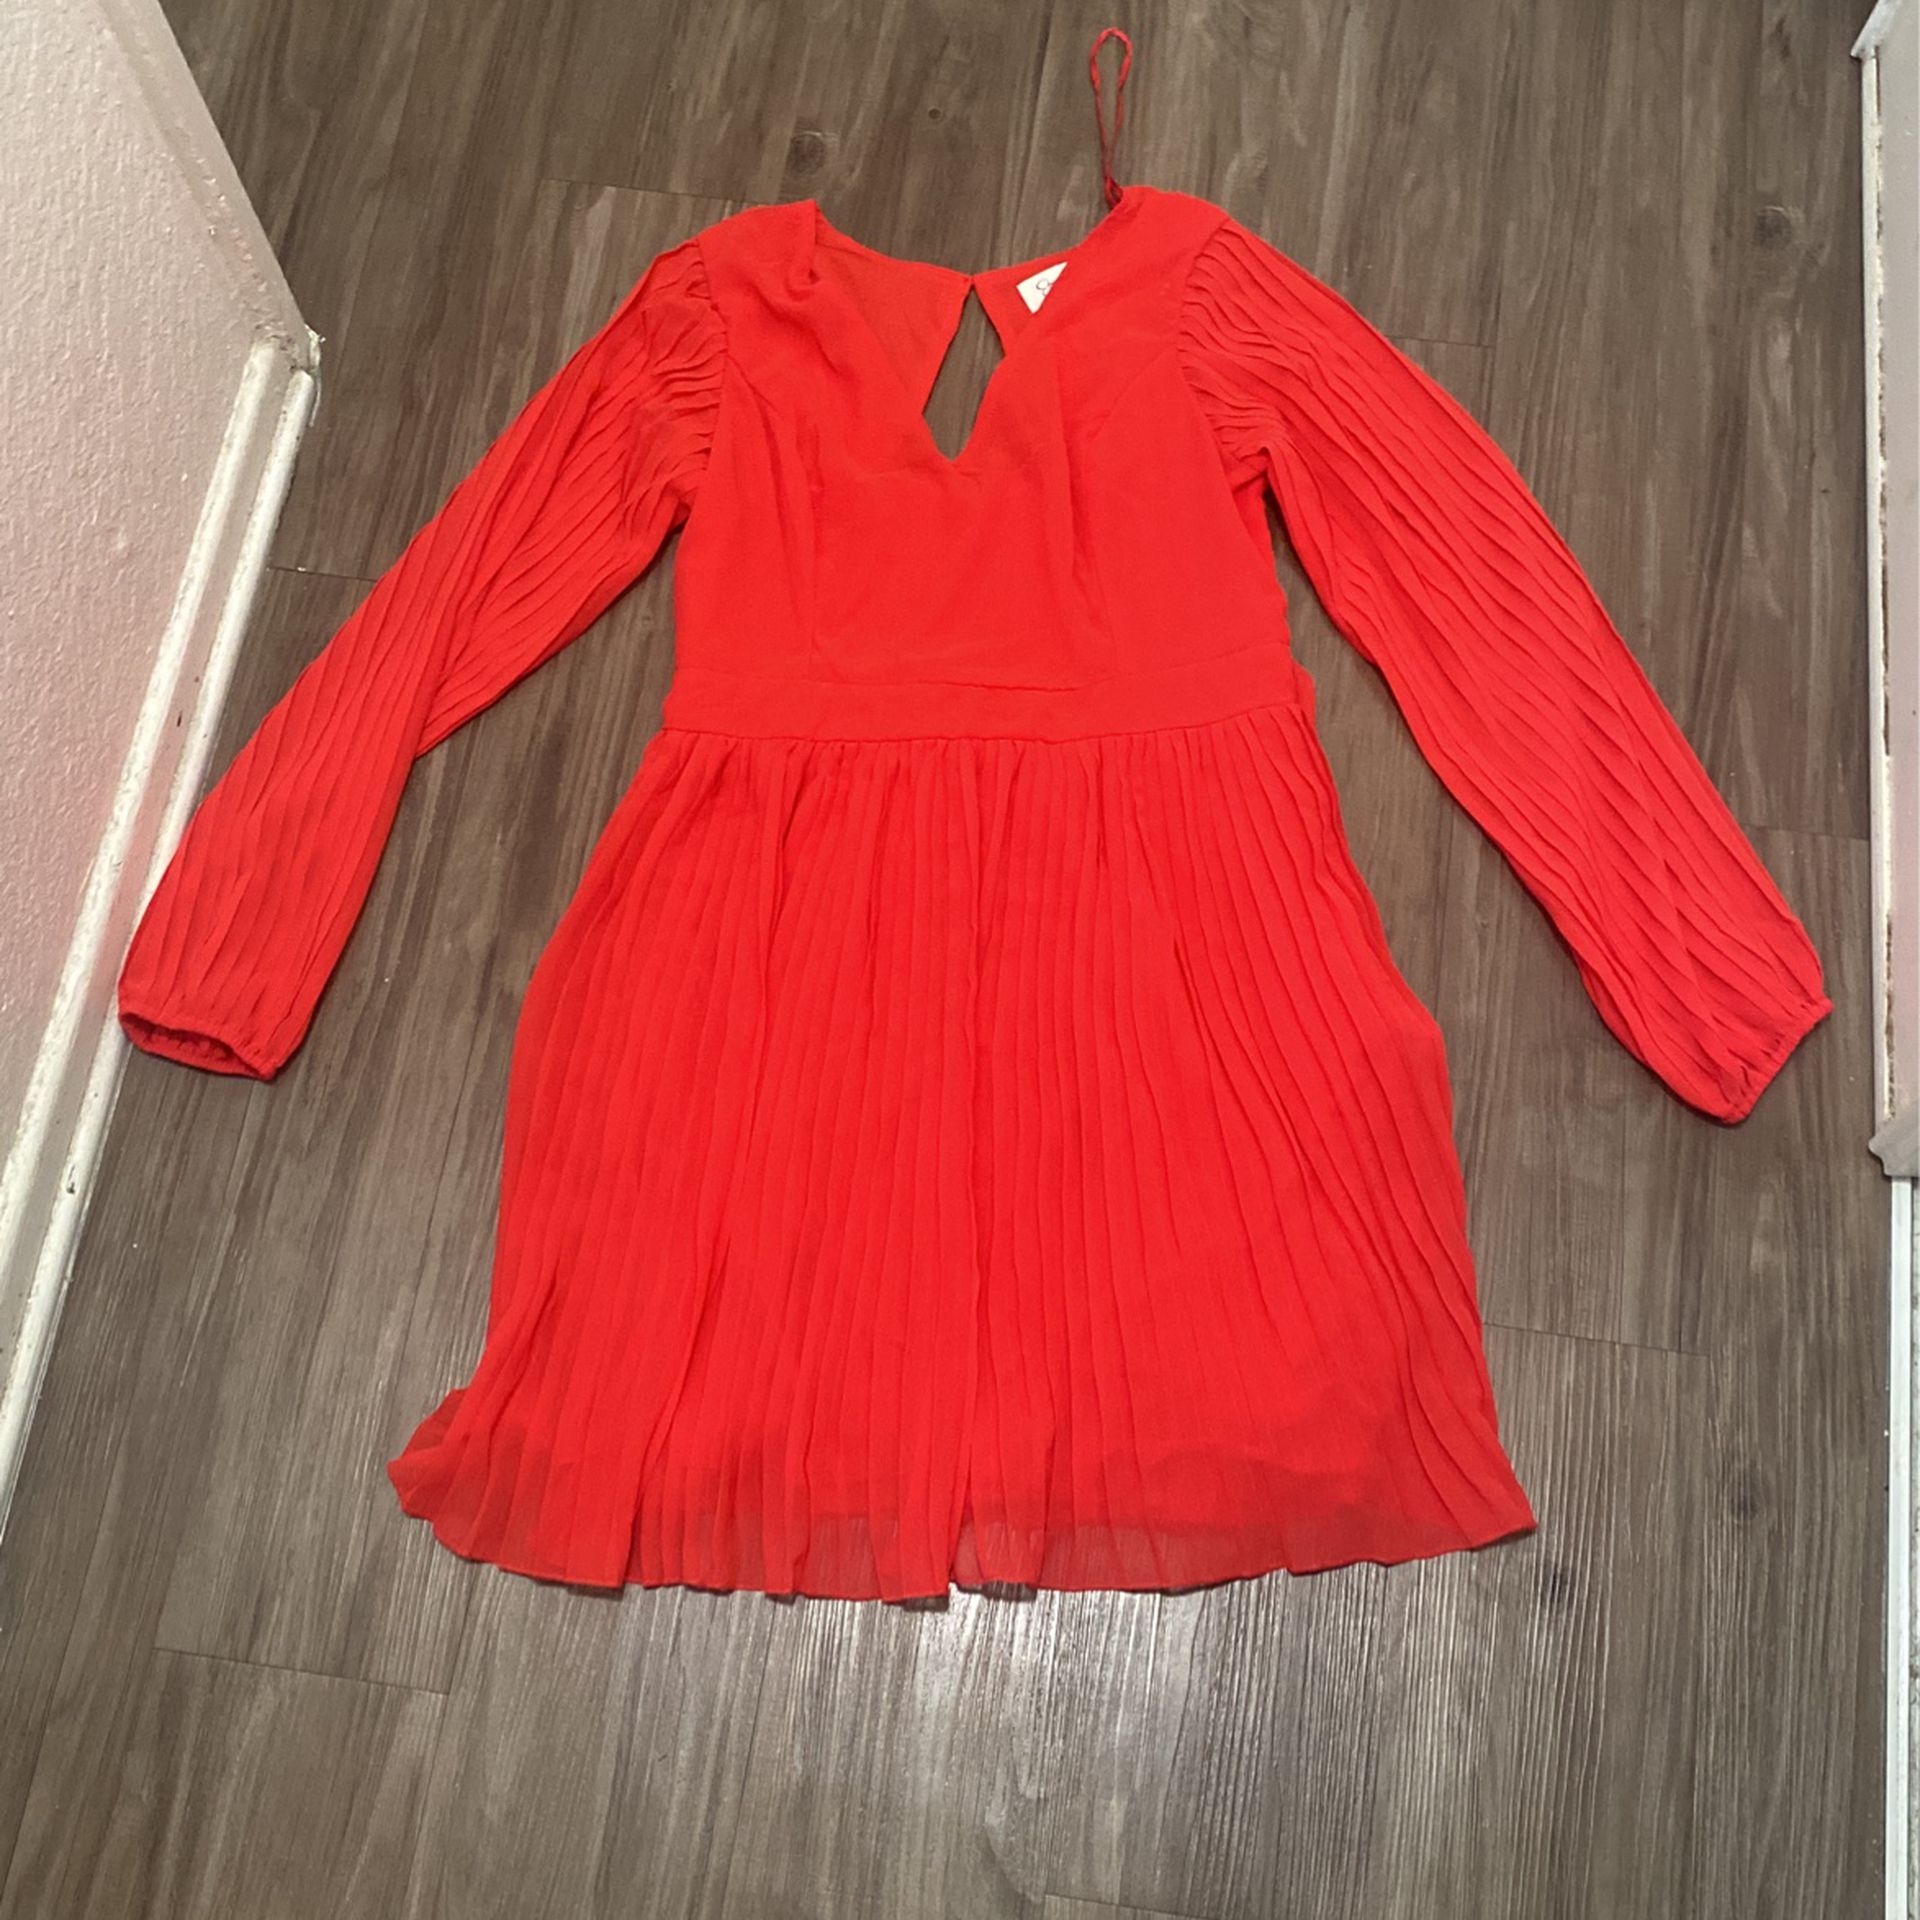 Jessica Simpson Red Dress for Sale in Rialto, CA - OfferUp